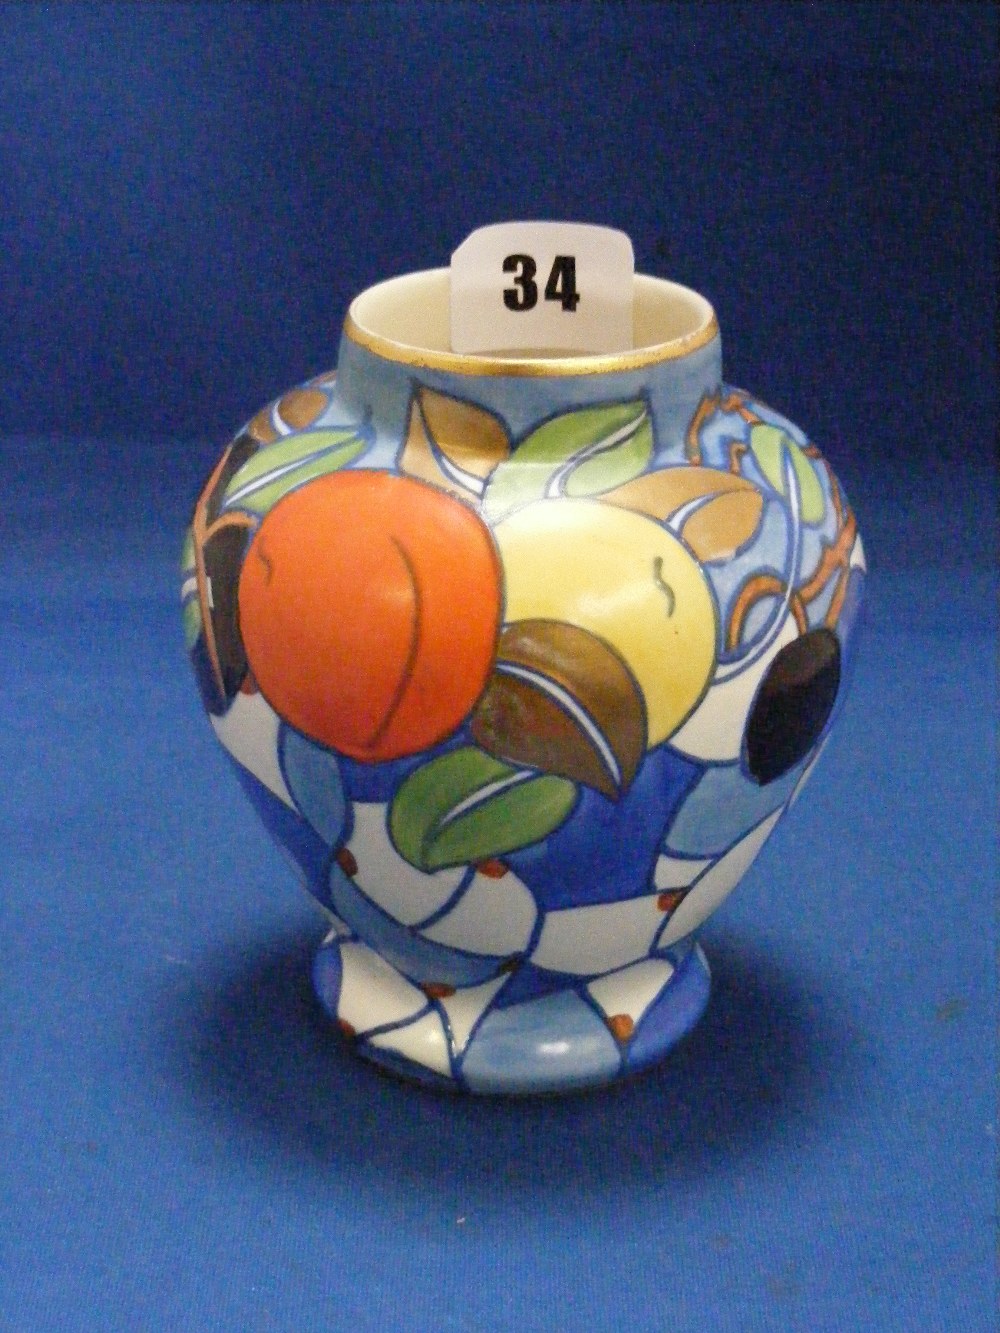 A highly decorative Bursley ware vase designed by Charlotte Rhead of baluster form with abstract